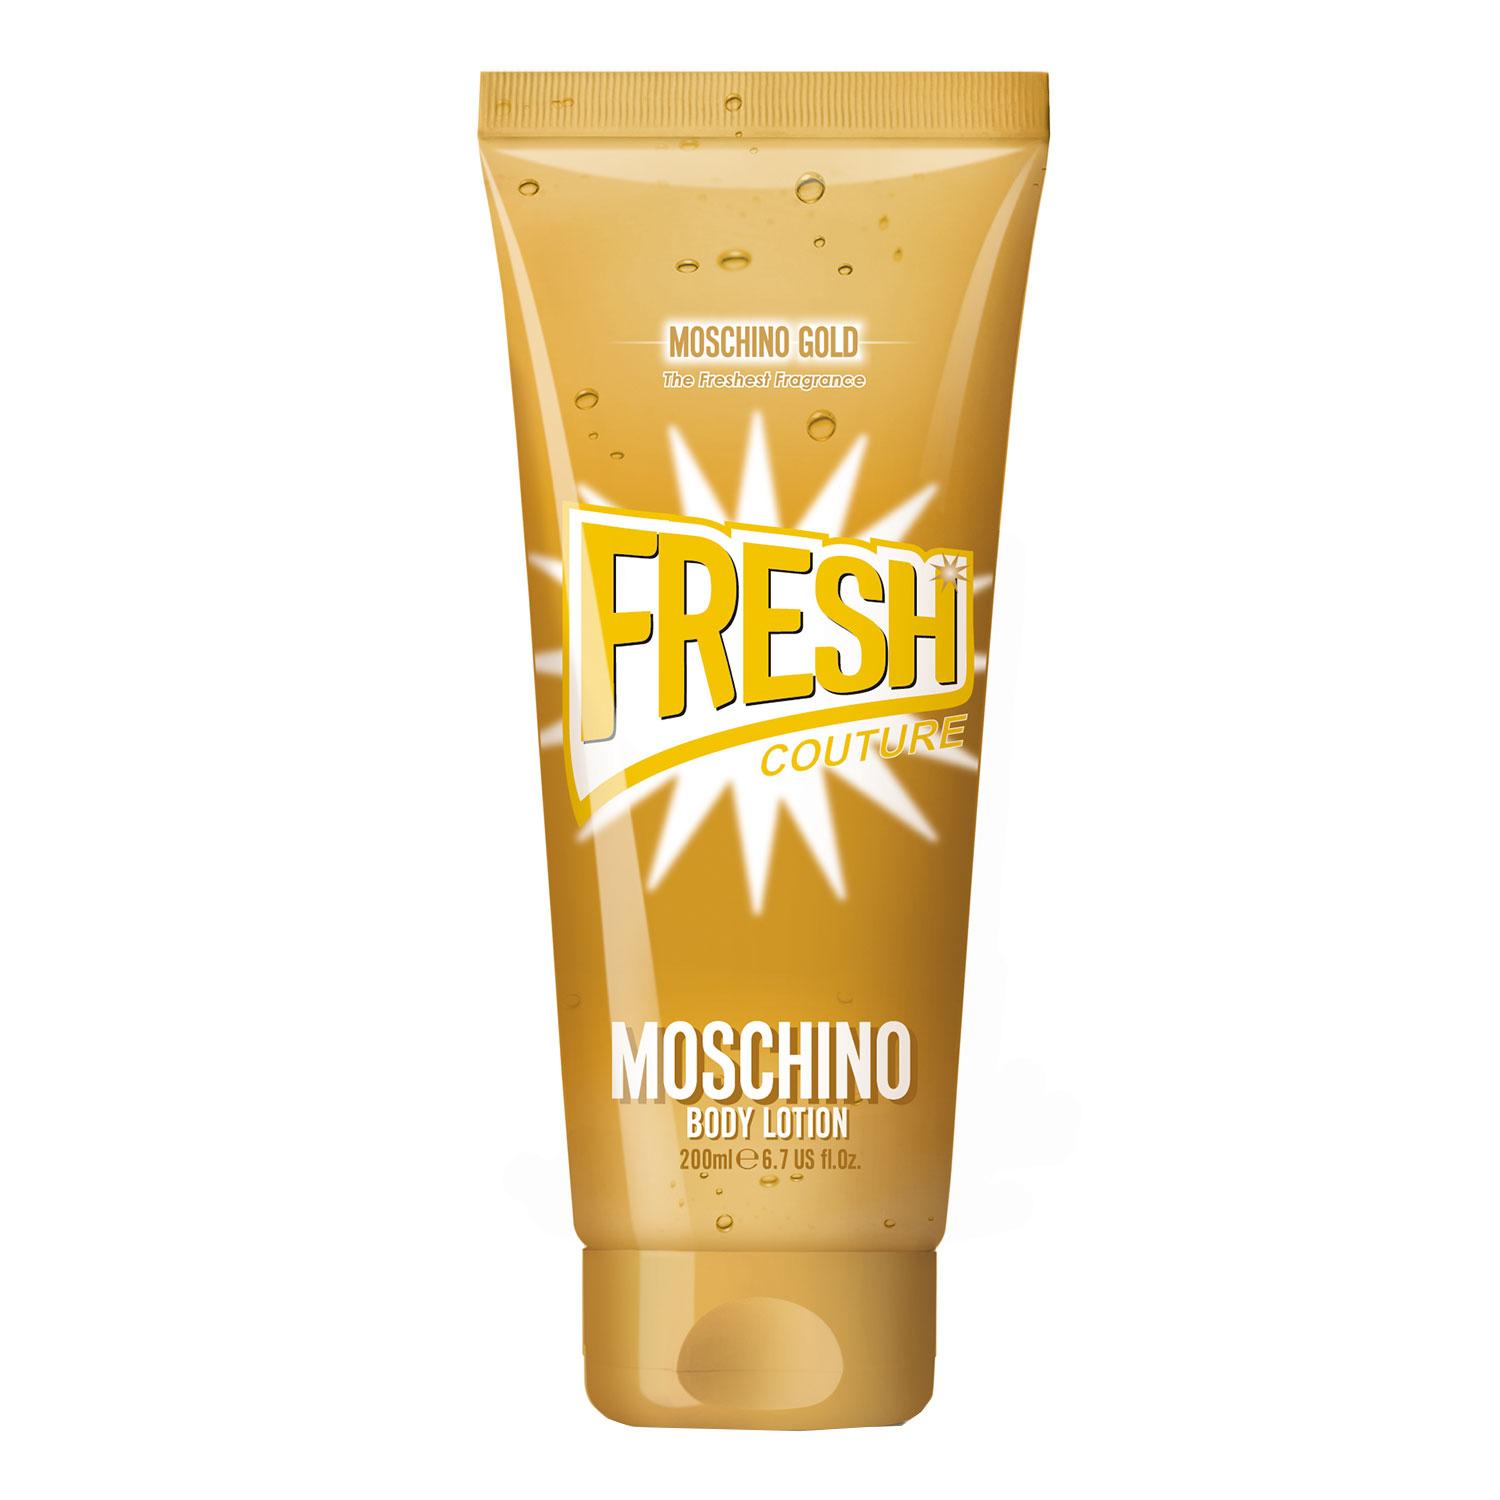 Gold Fresh Couture - The freshest Body Lotion